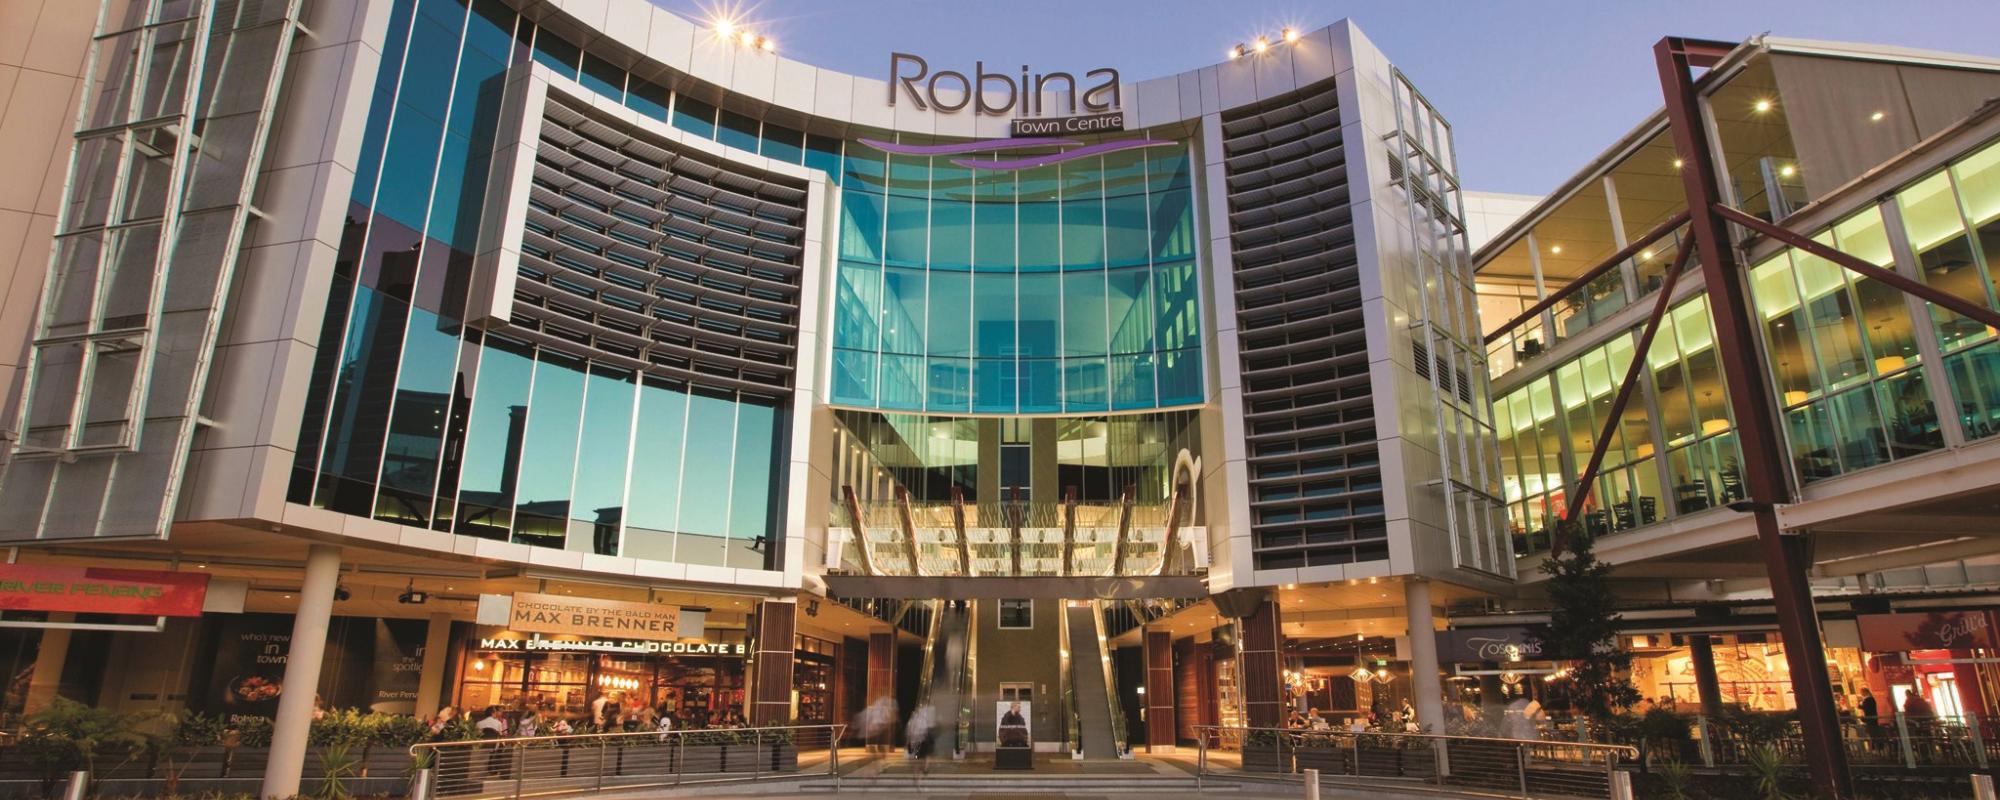 Robina Town Centre is only a 13 minute drive from Nobby Beach Holiday Village